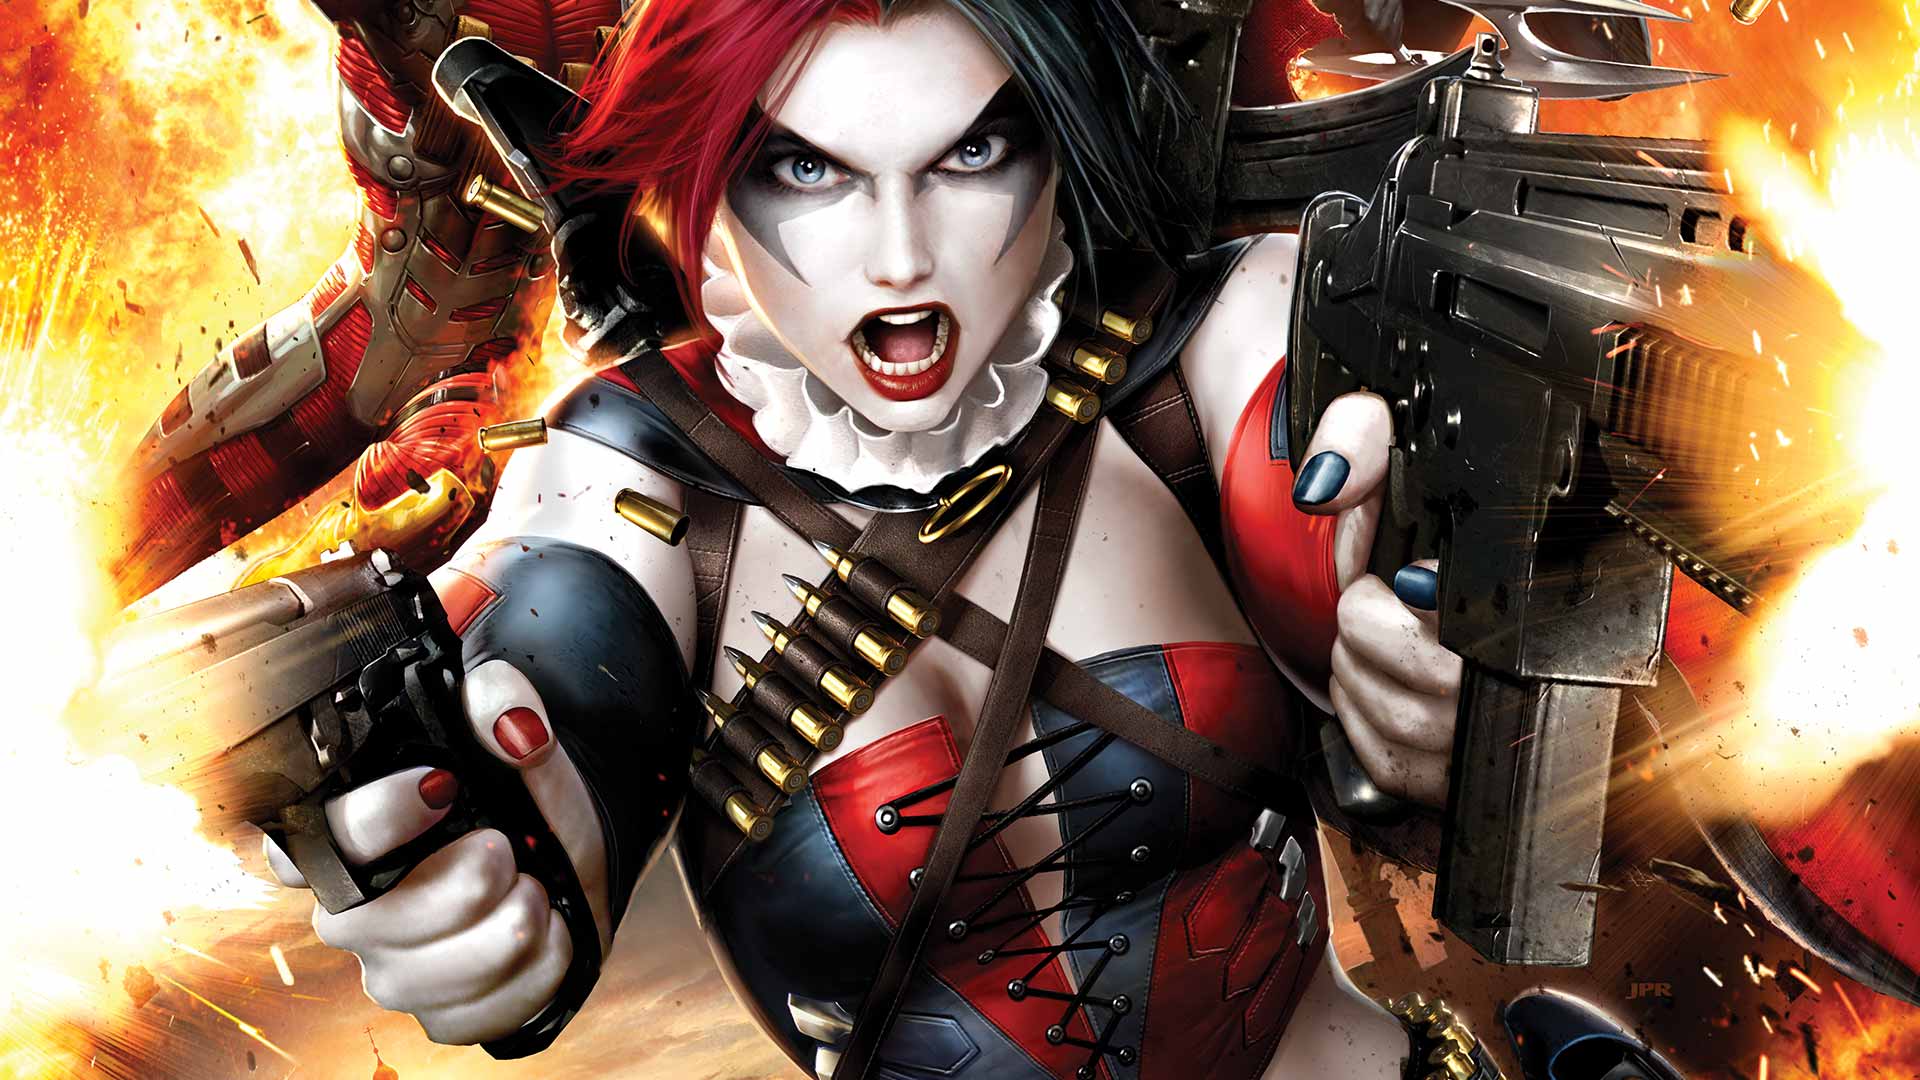 Batman Harley Quinn And Deadshot Porn - Suicide Solution: The History of Harley Quinn